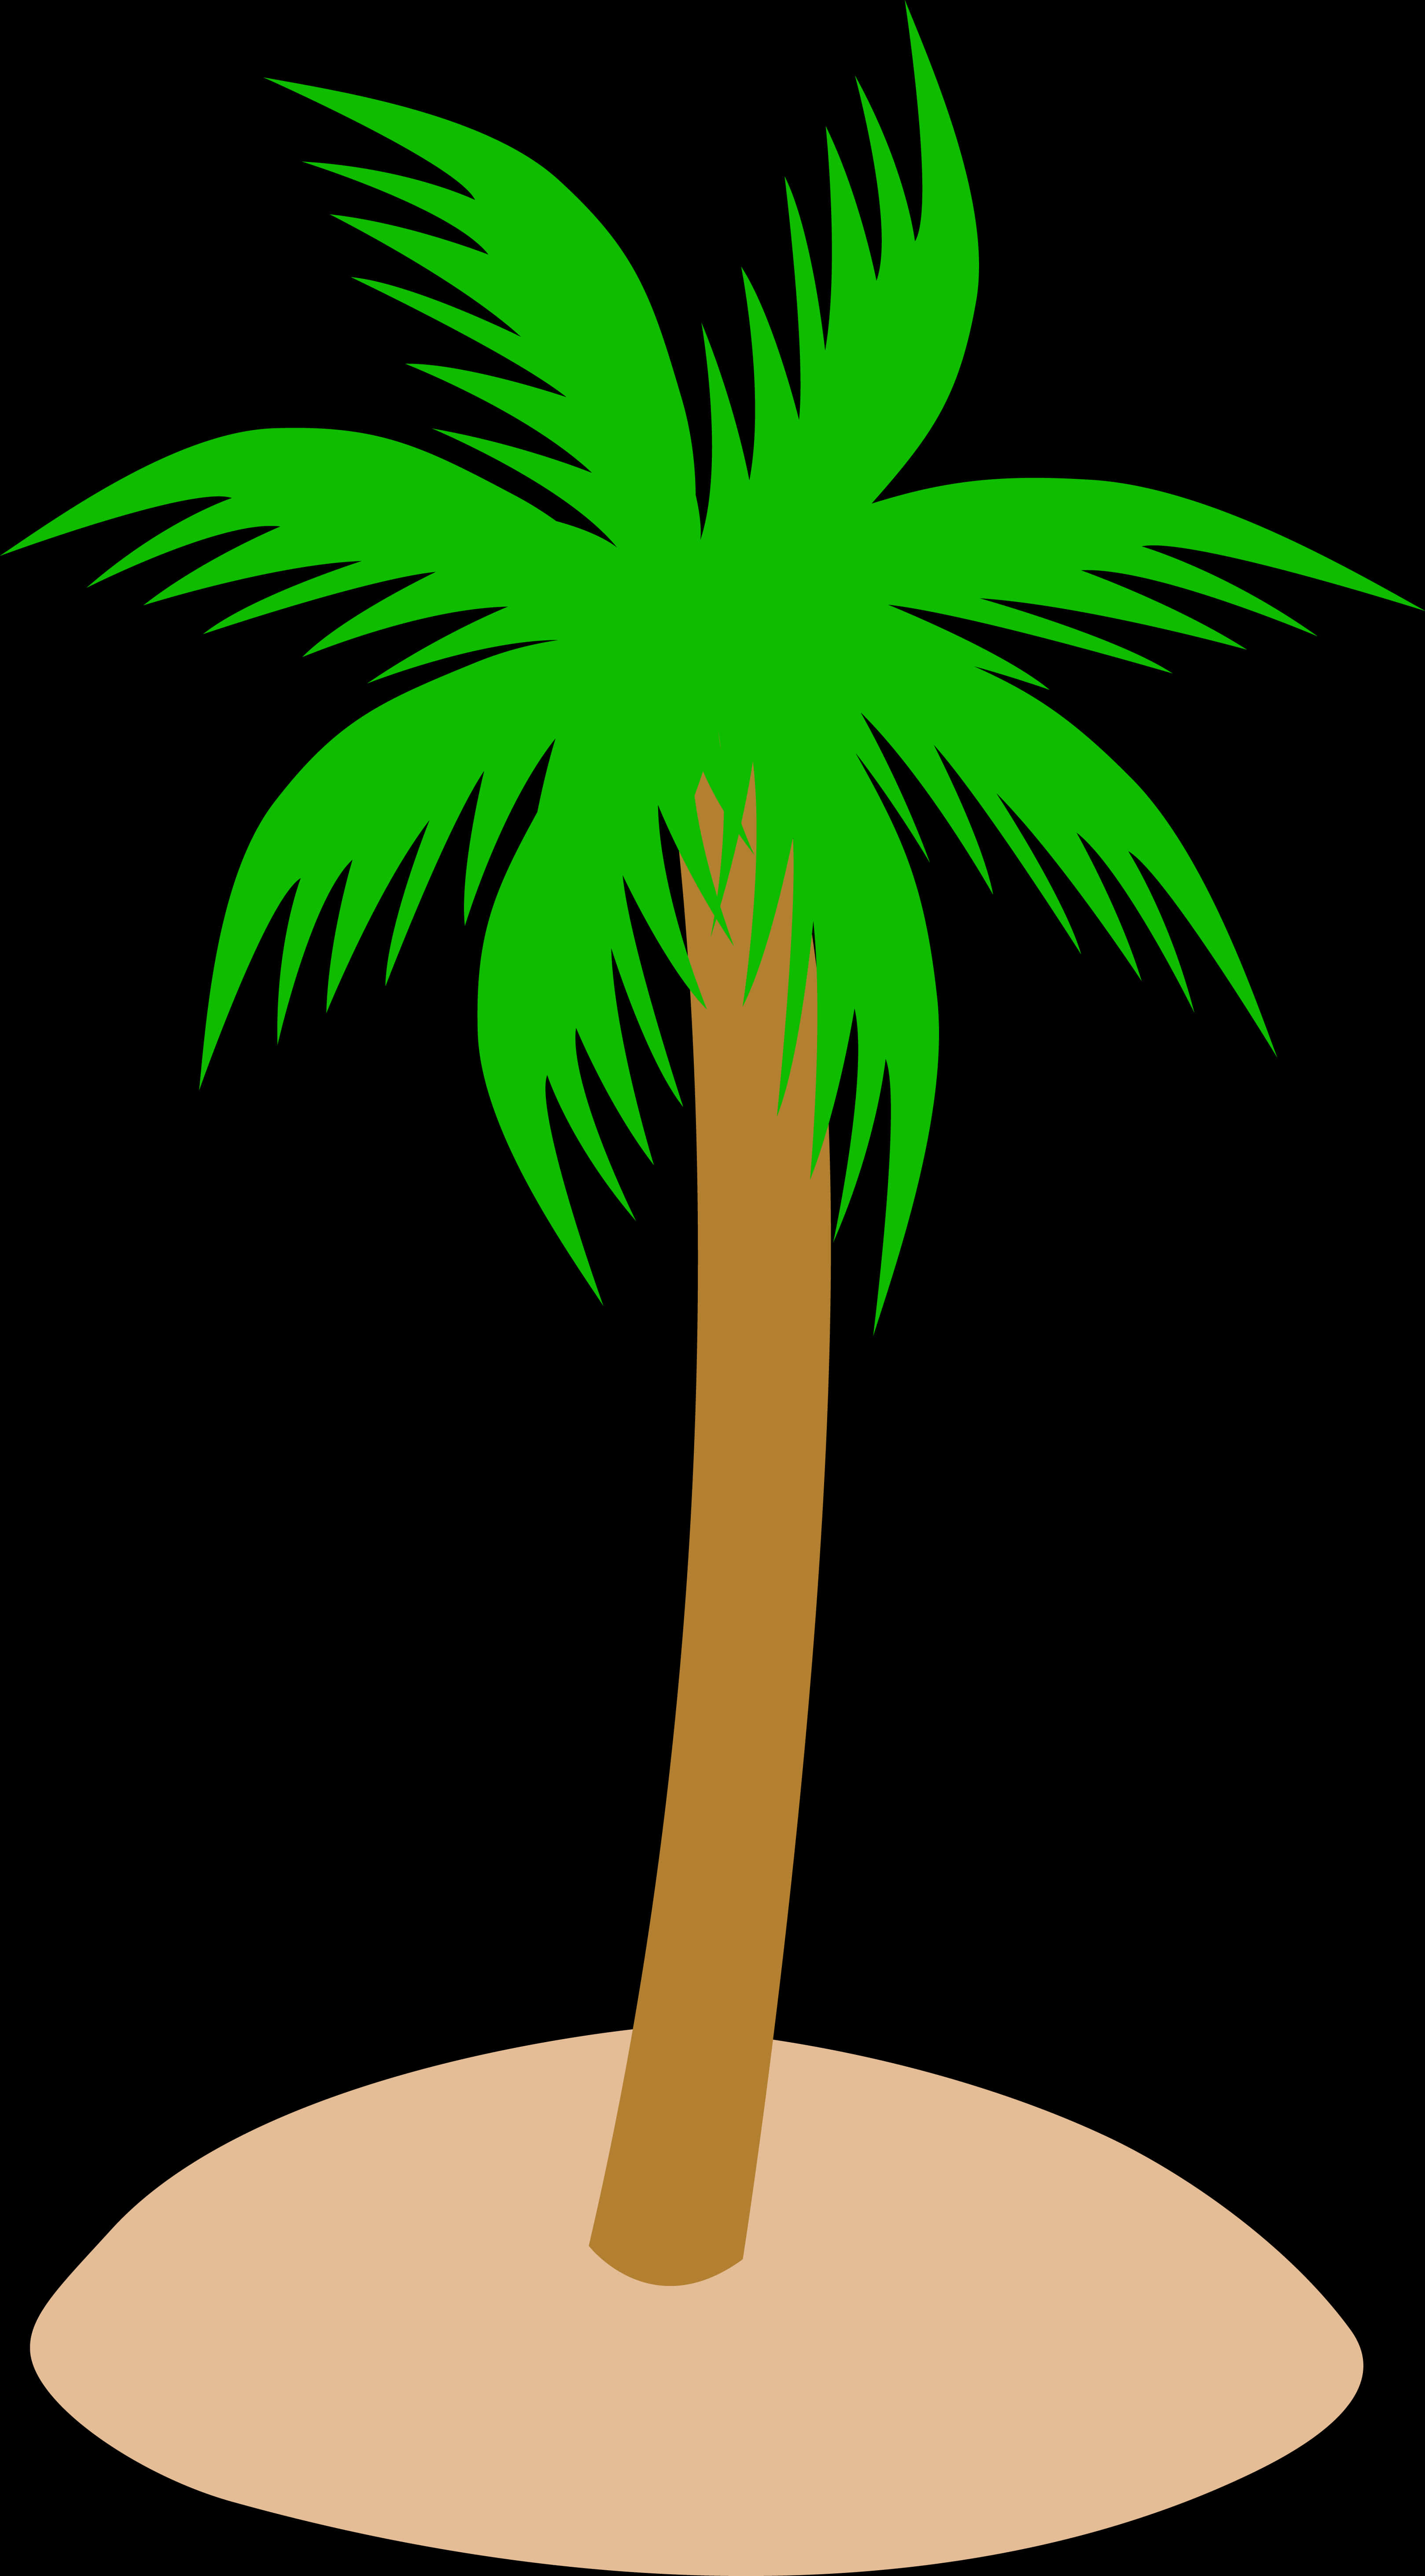 Download A Palm Tree With Green Leaves [100% Free] - FastPNG